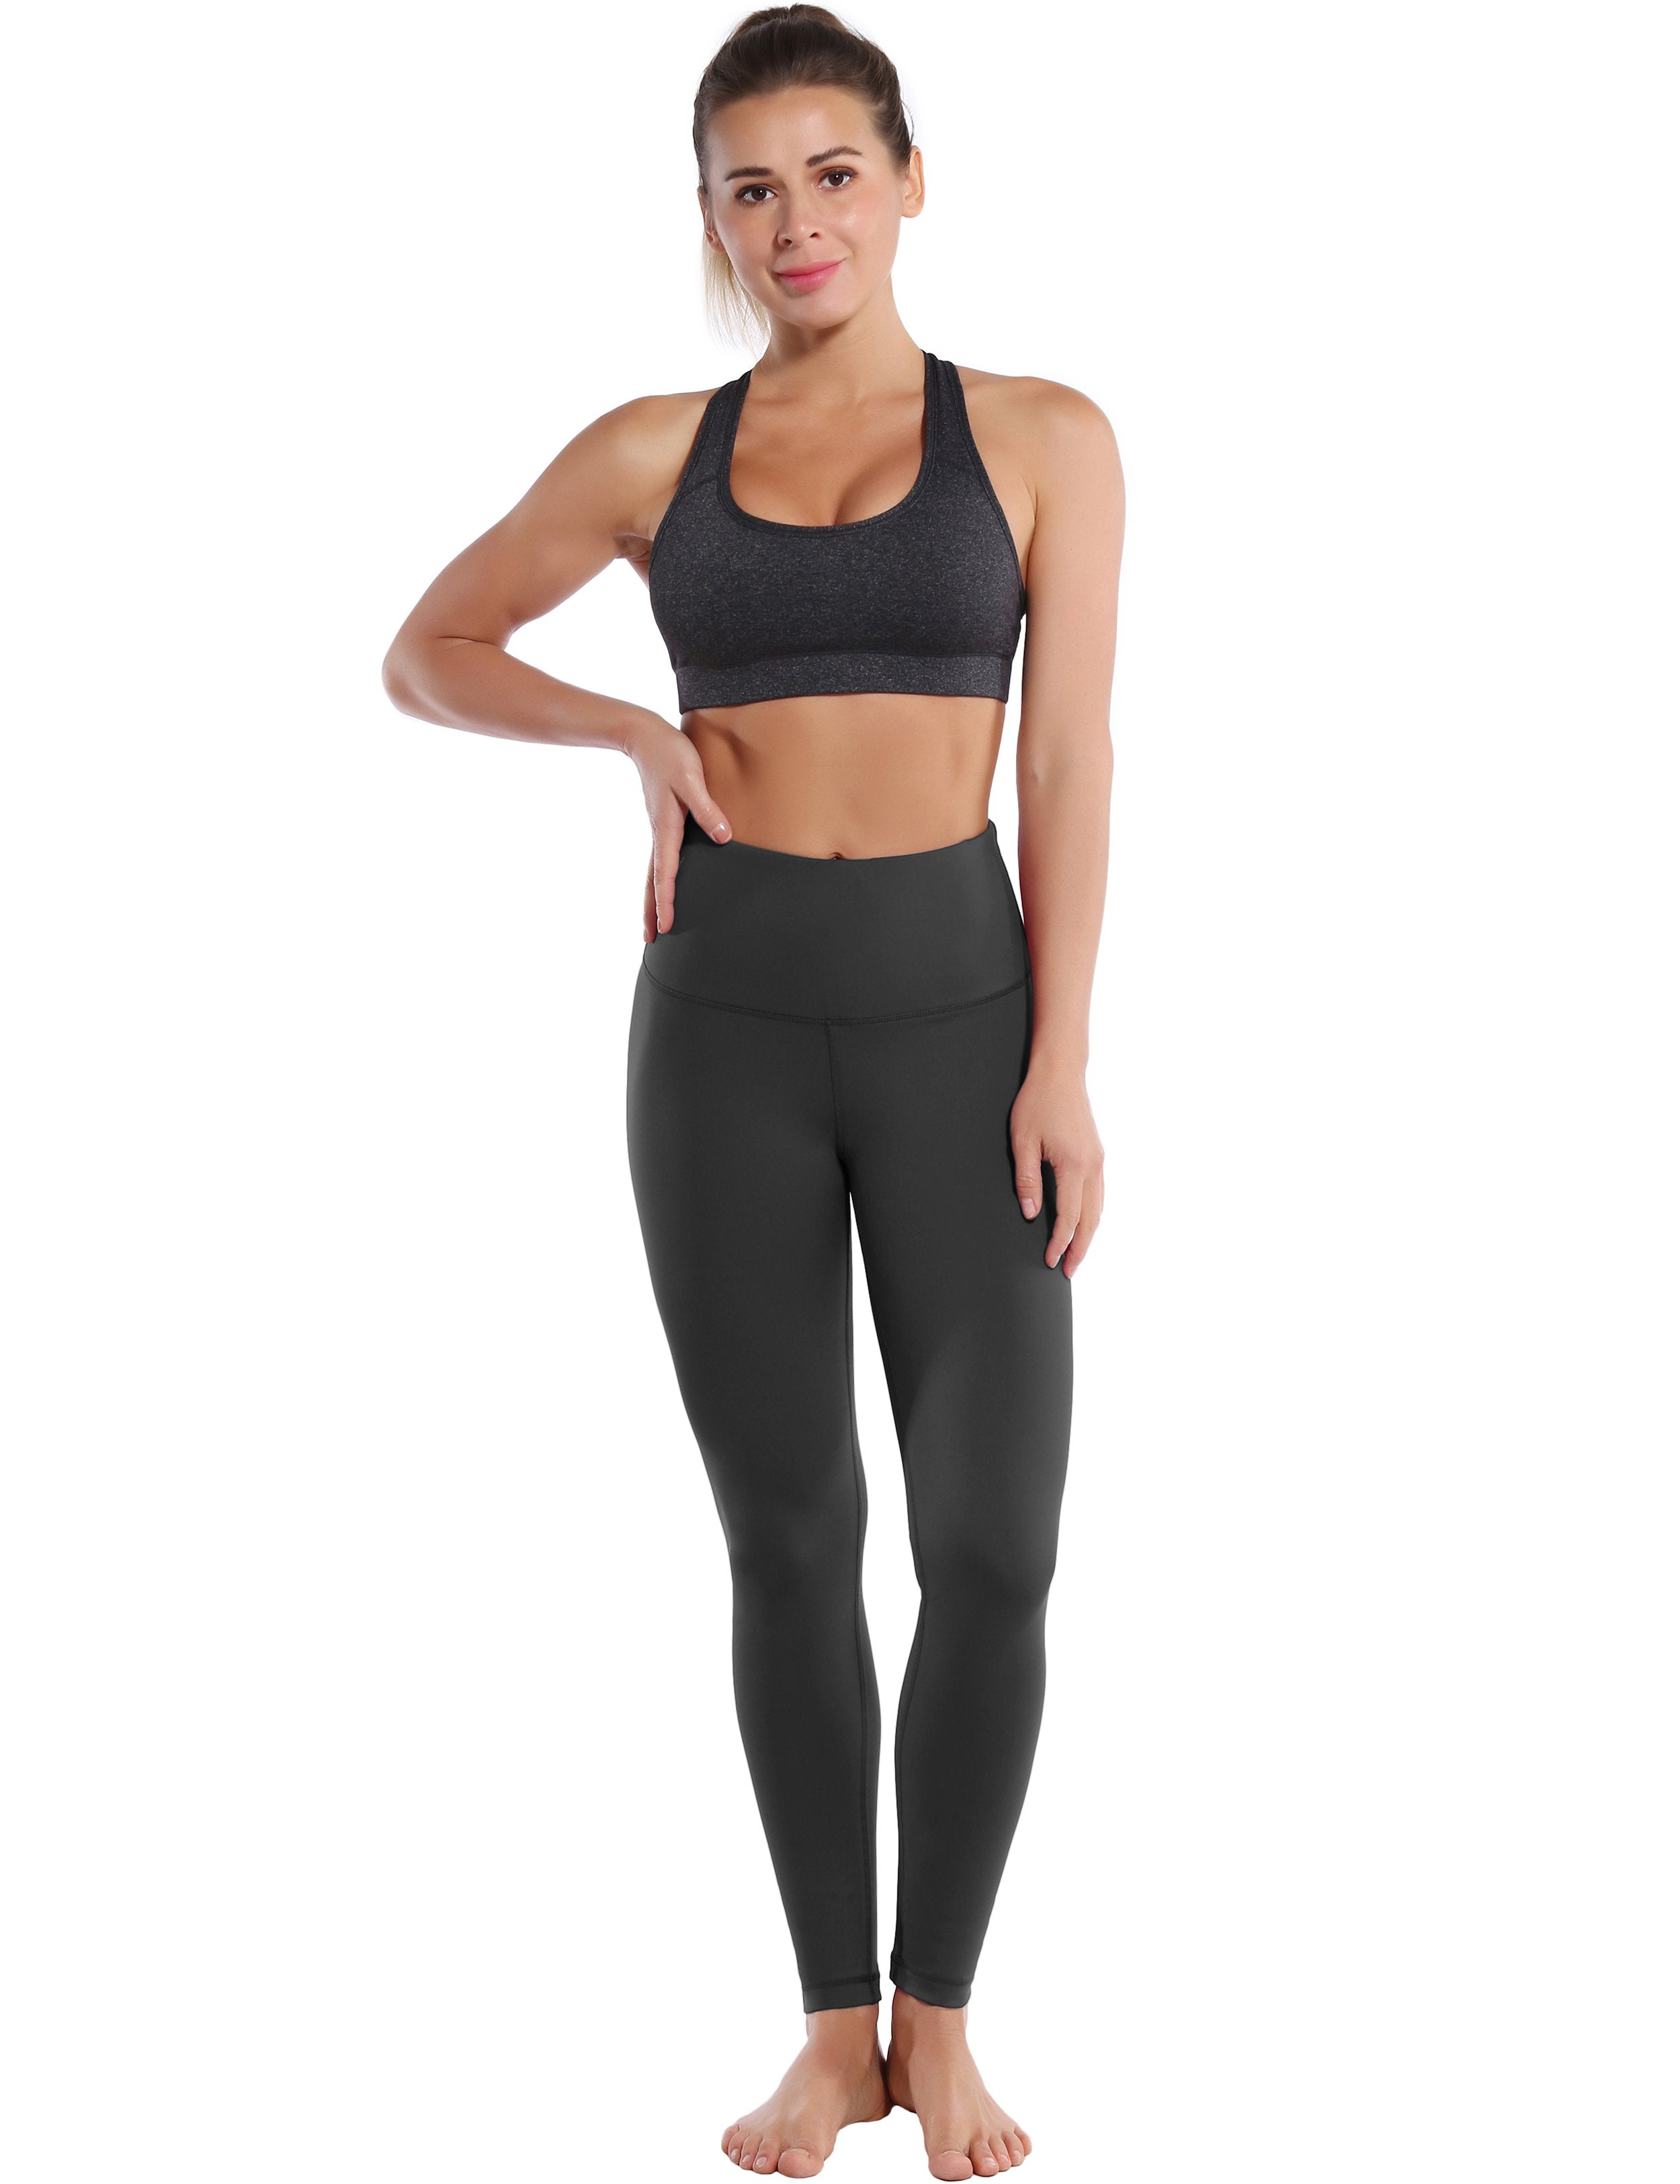 High Waist Running Pants shadowcharcoal 75%Nylon/25%Spandex Fabric doesn't attract lint easily 4-way stretch No see-through Moisture-wicking Tummy control Inner pocket Four lengths